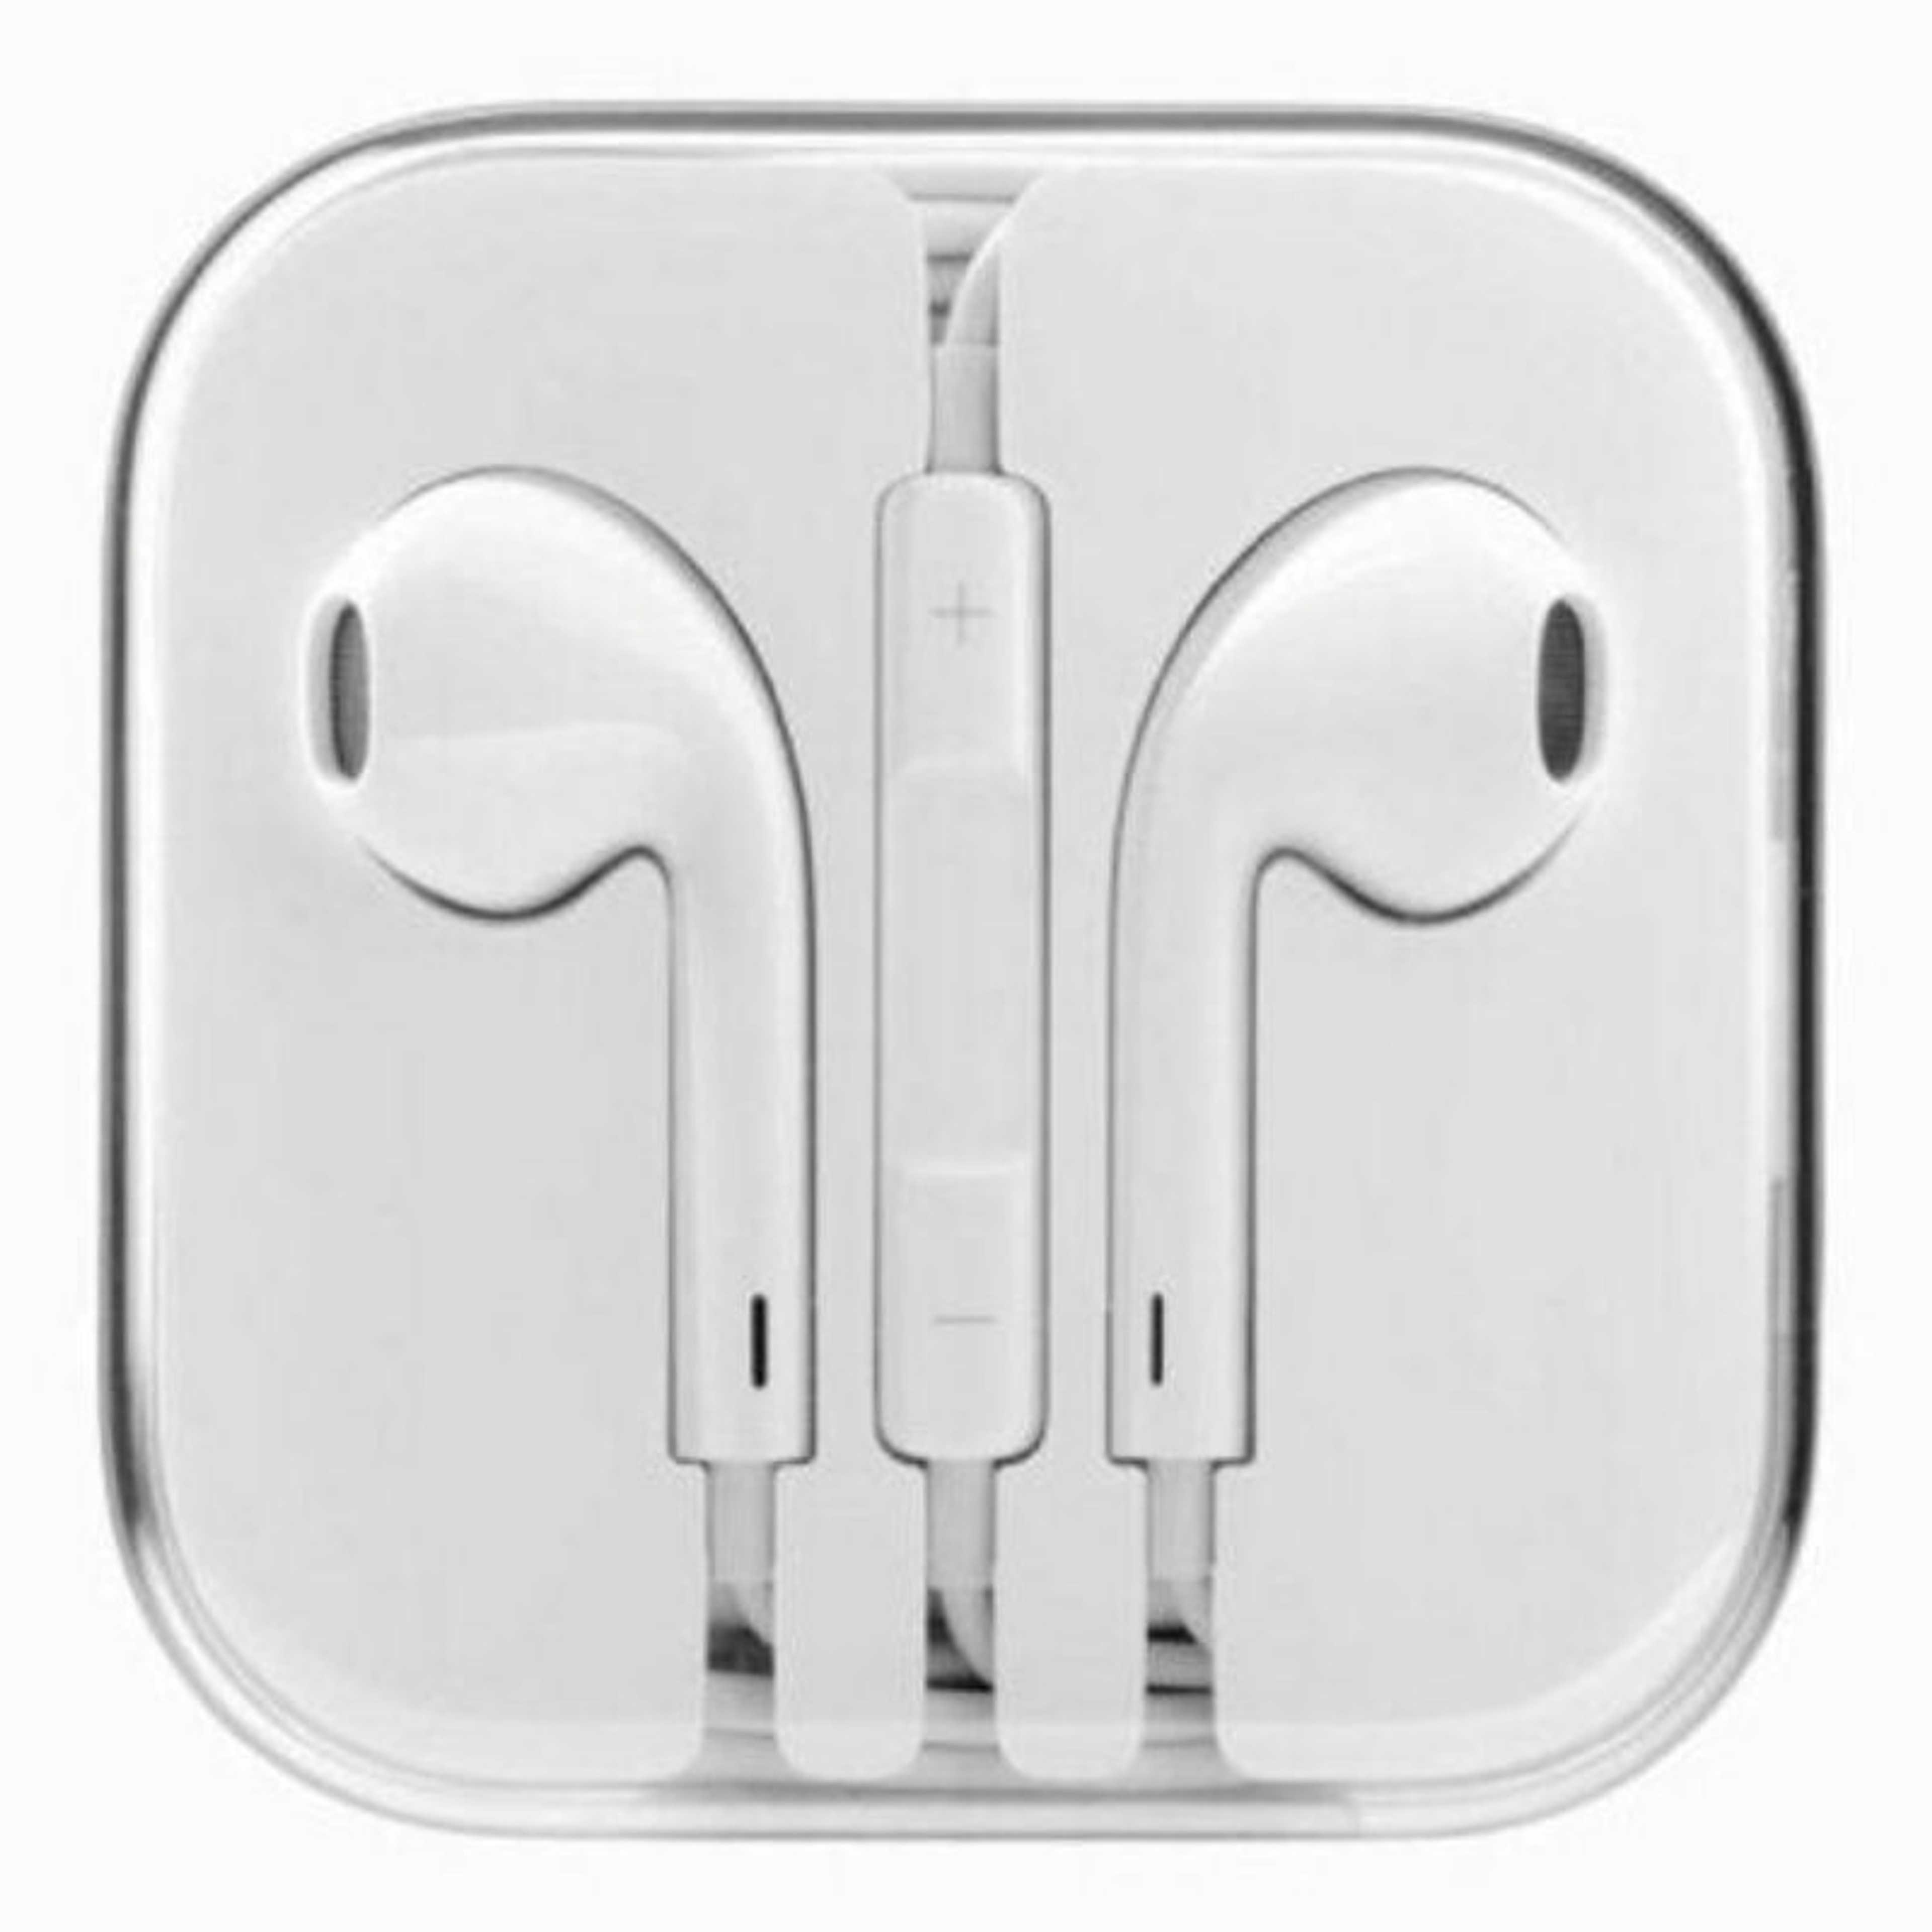 In-Ear White Earpods For Apple IPhones High Quality With Mic